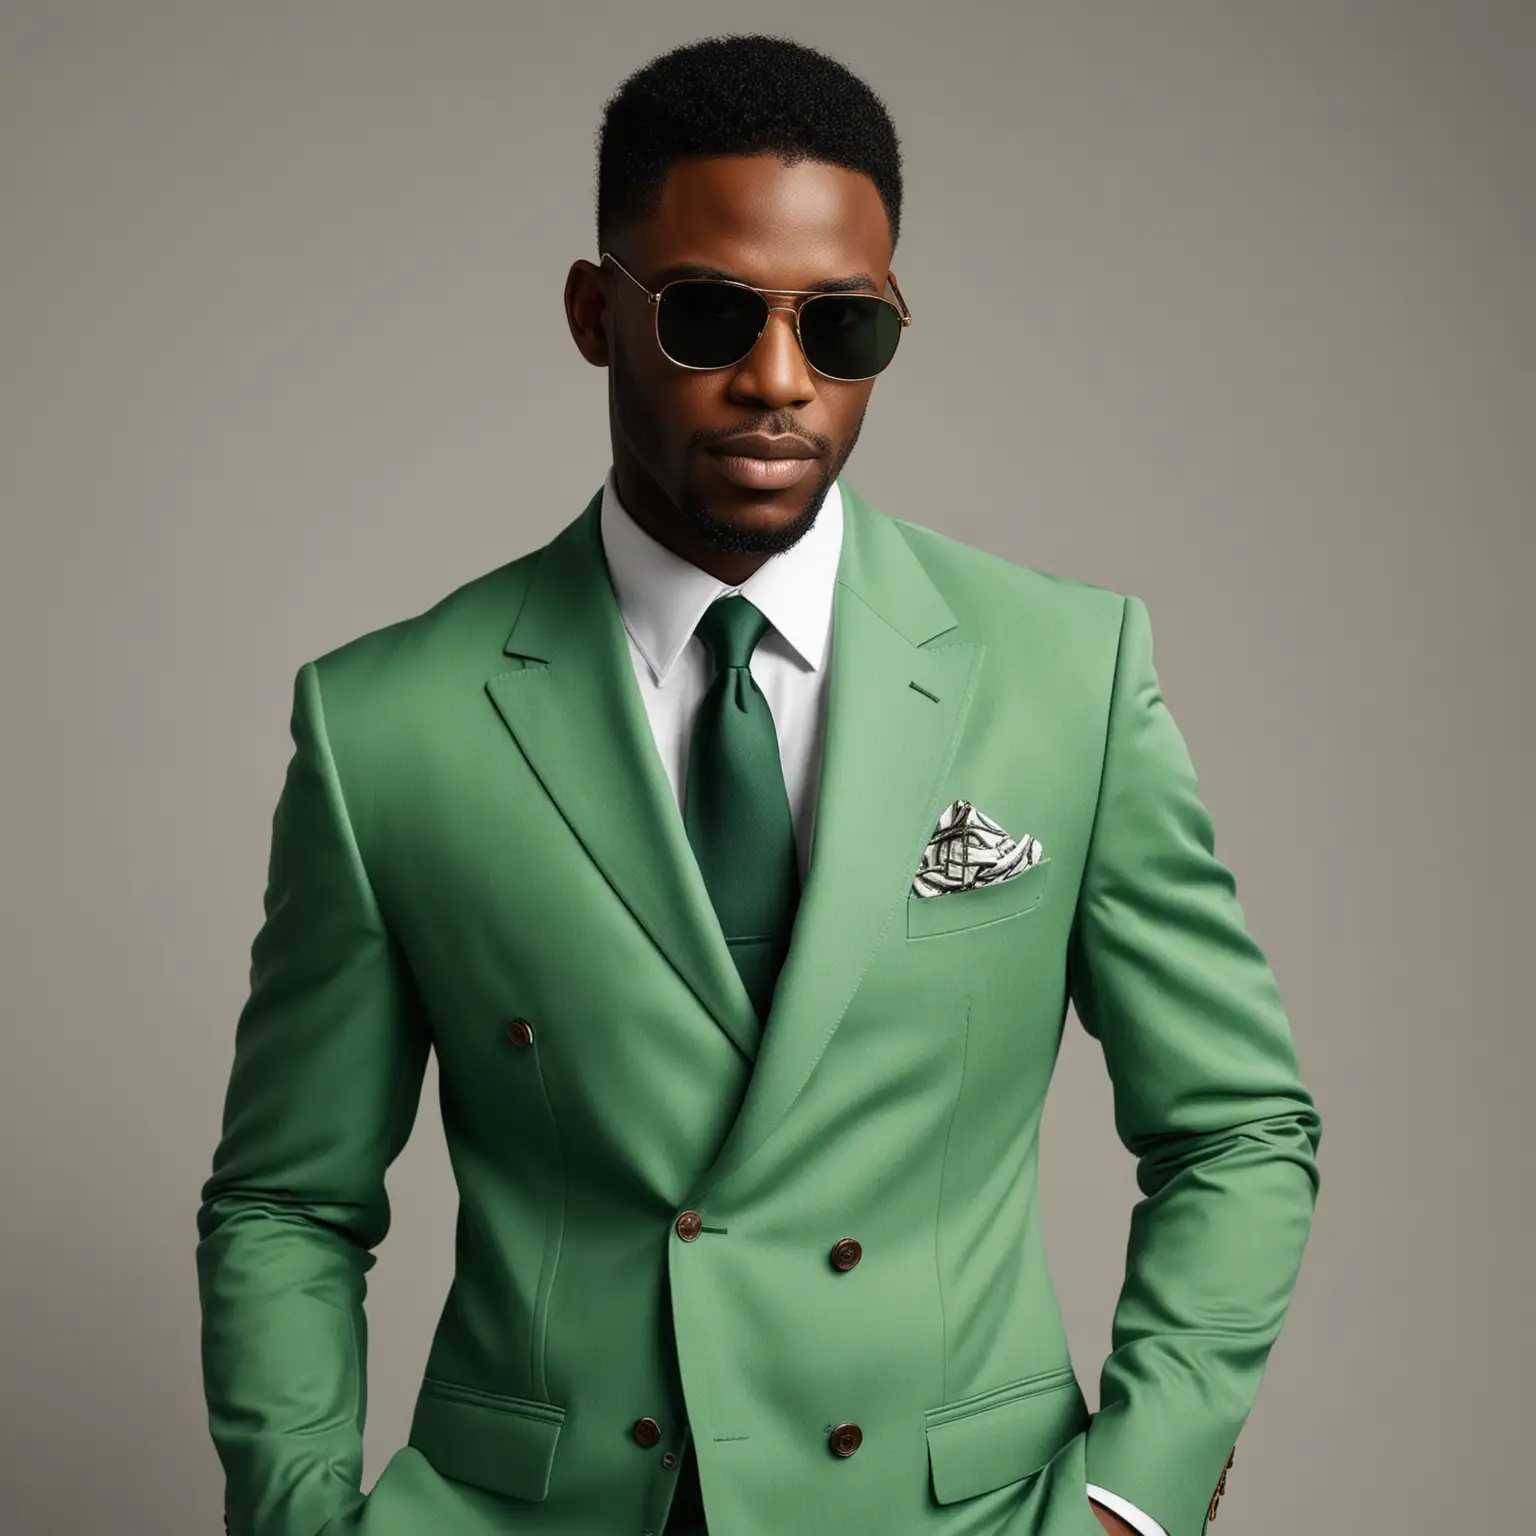 black man in green suit in shades